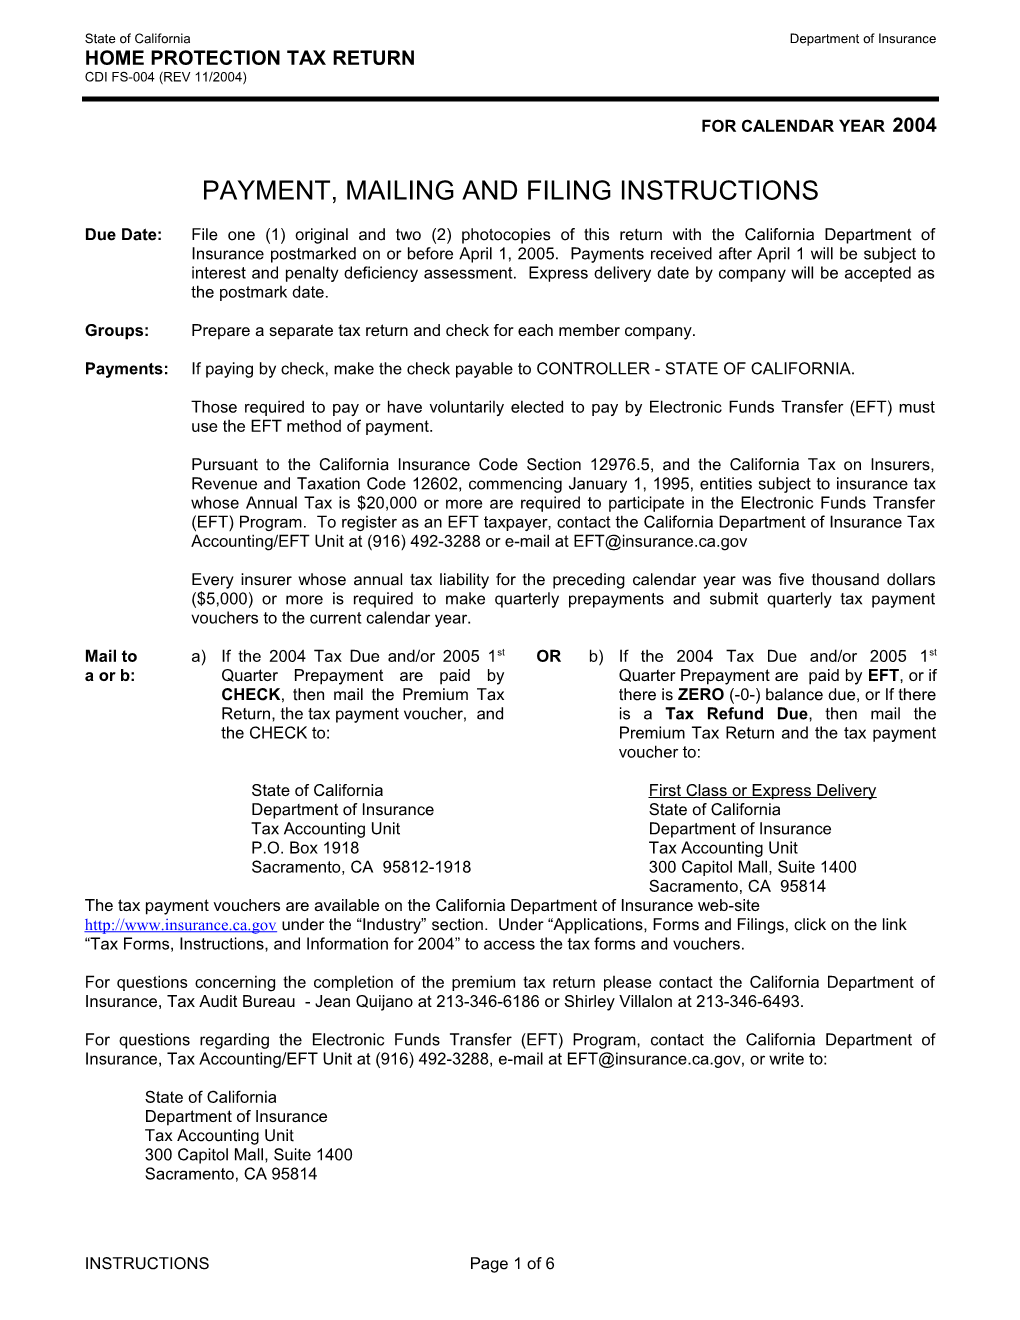 Payment, Mailing and Filing Instructions s3